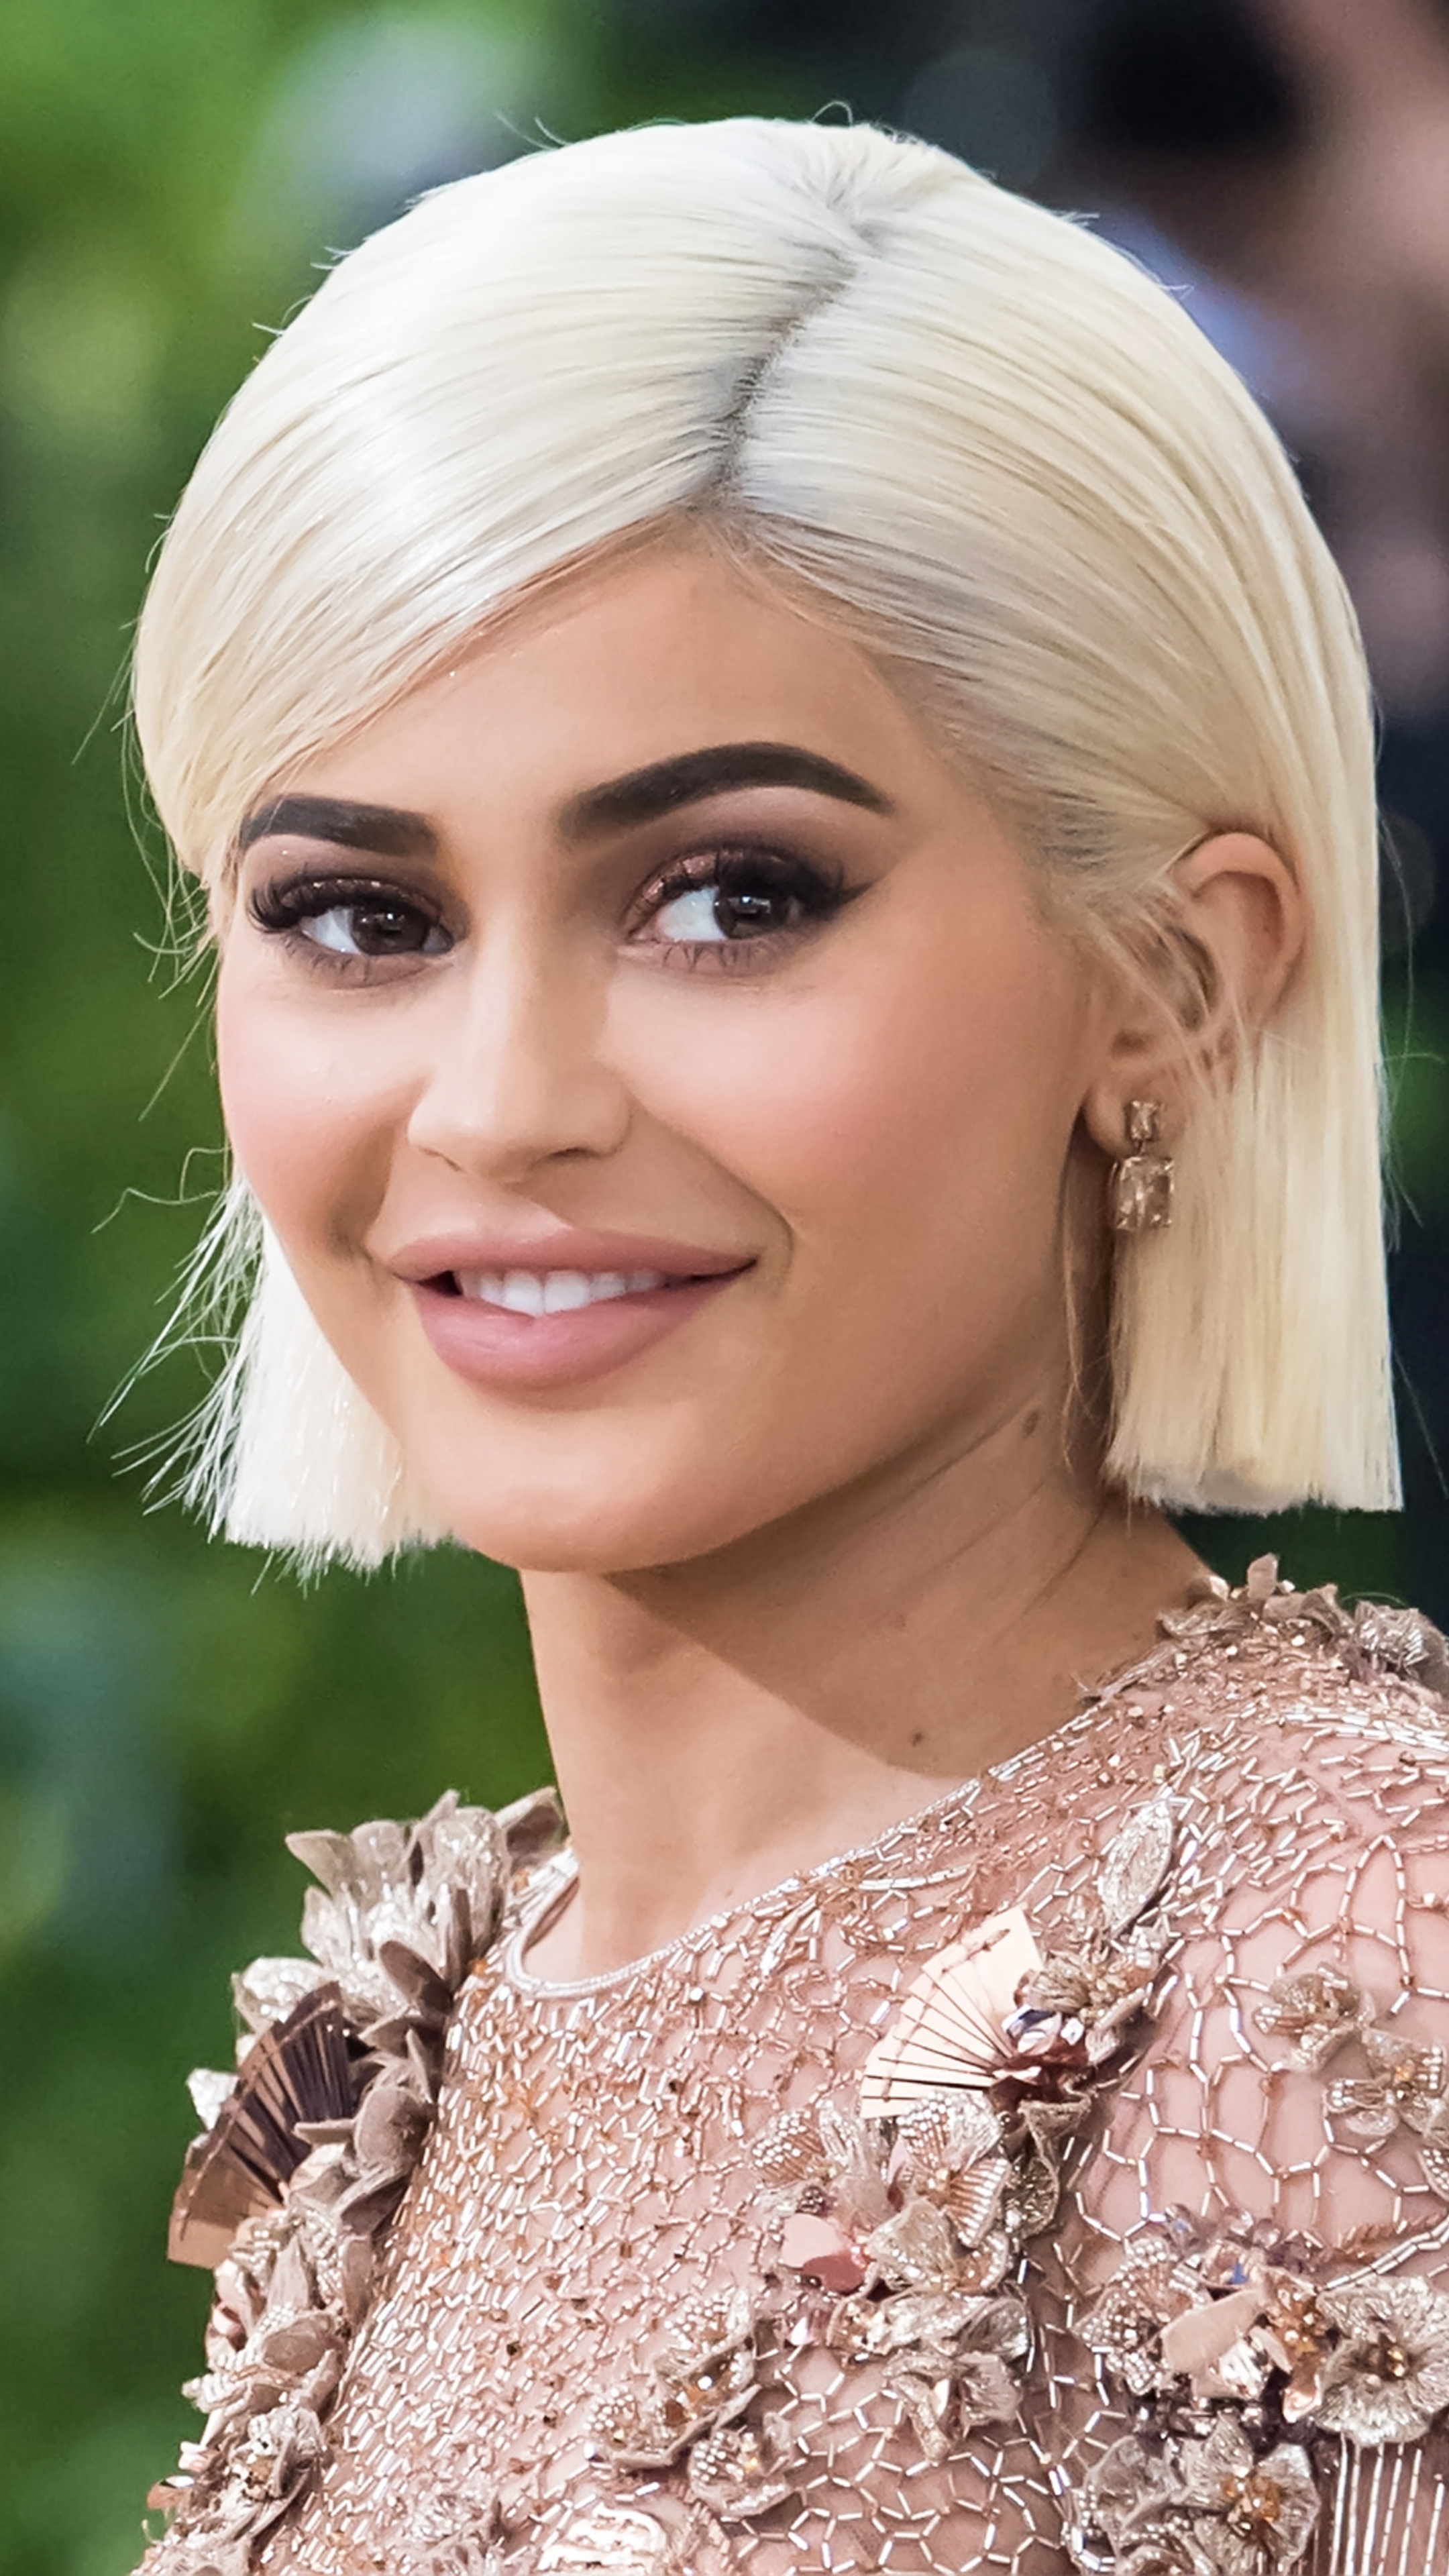 Kylie Jenner, Captivating smile, Sony Xperia wallpaper, High quality, 2160x3840 4K Phone